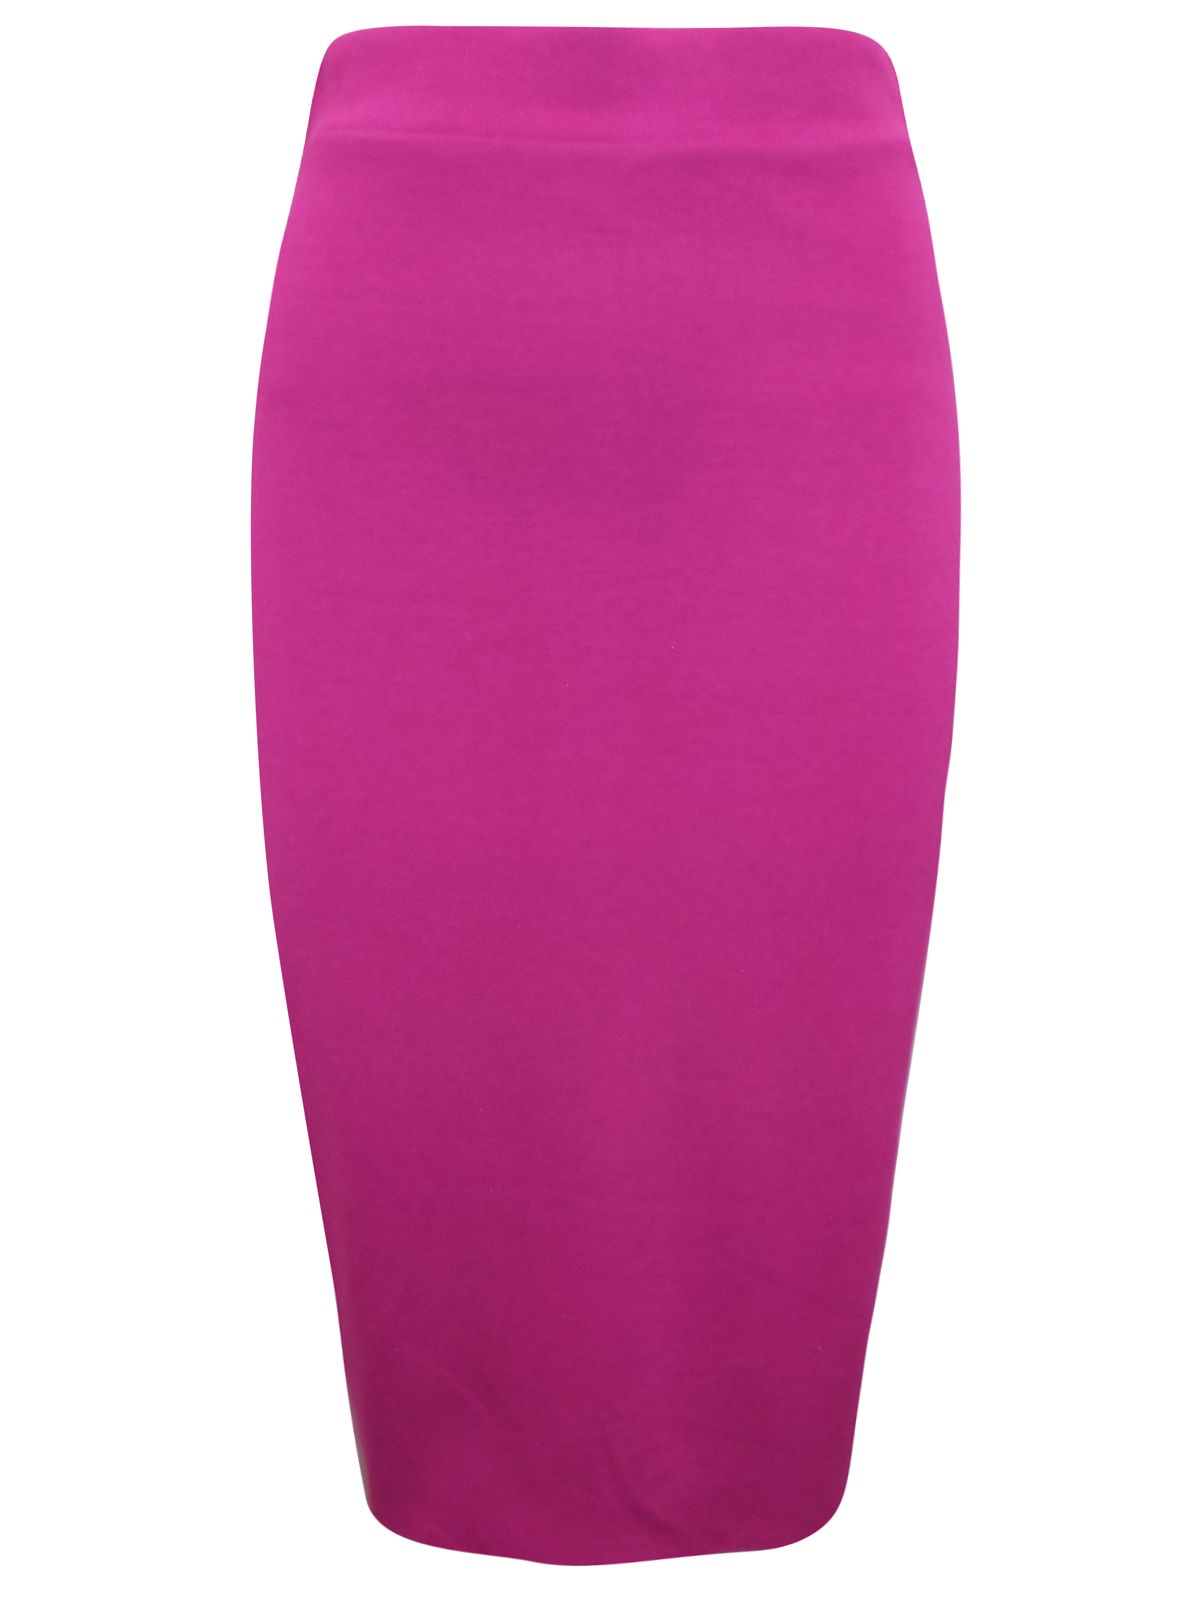 //text.. - - ASSORTED Ladies Pencil Skirts - Size 10 to 12